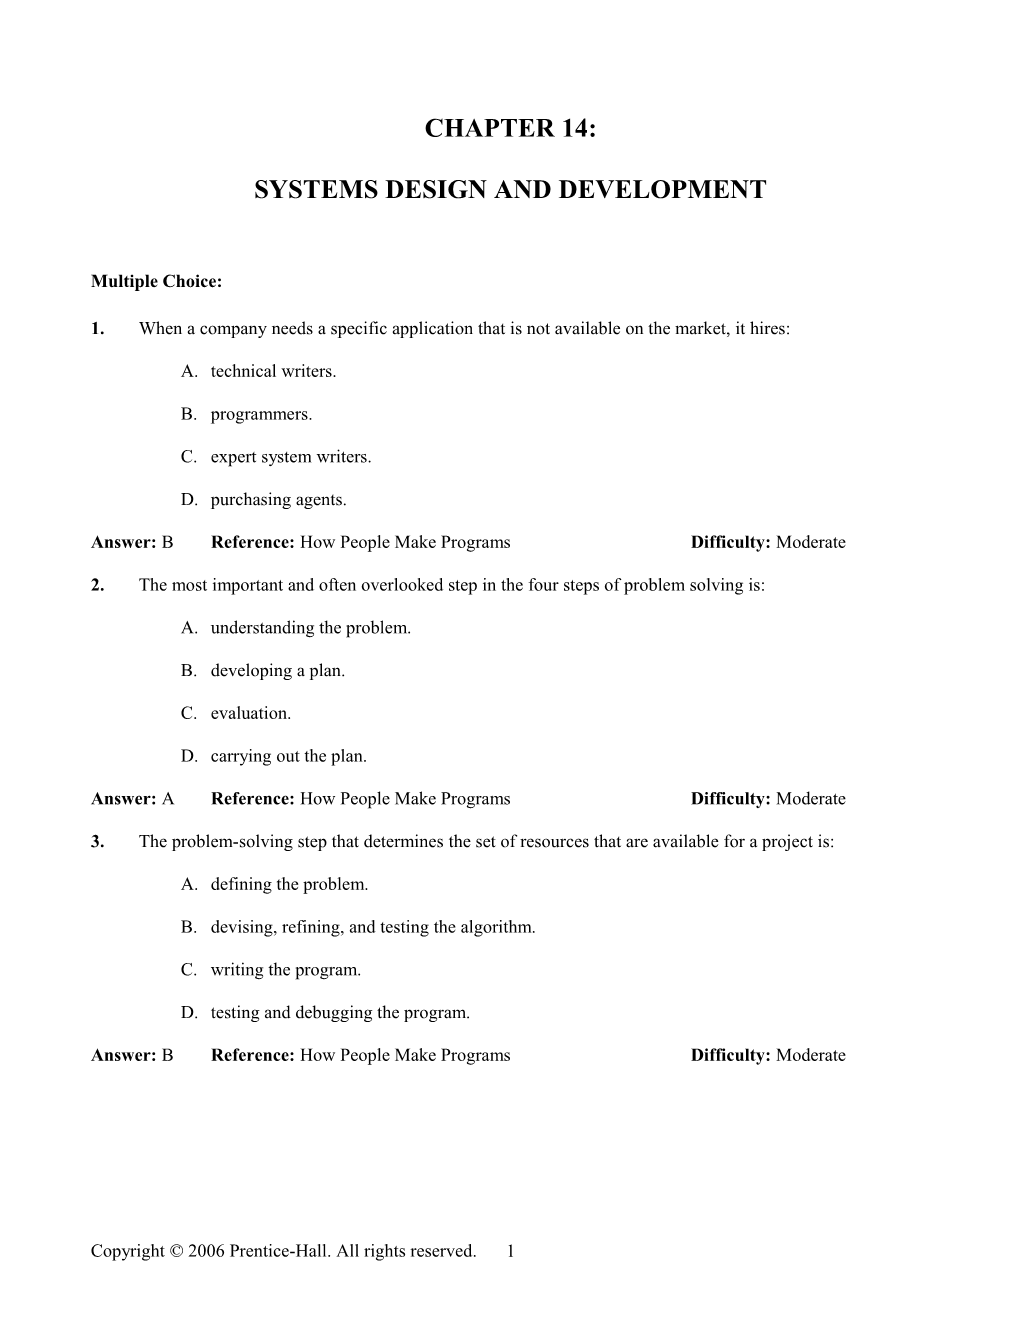 Chapter 14: Systems Design and Development